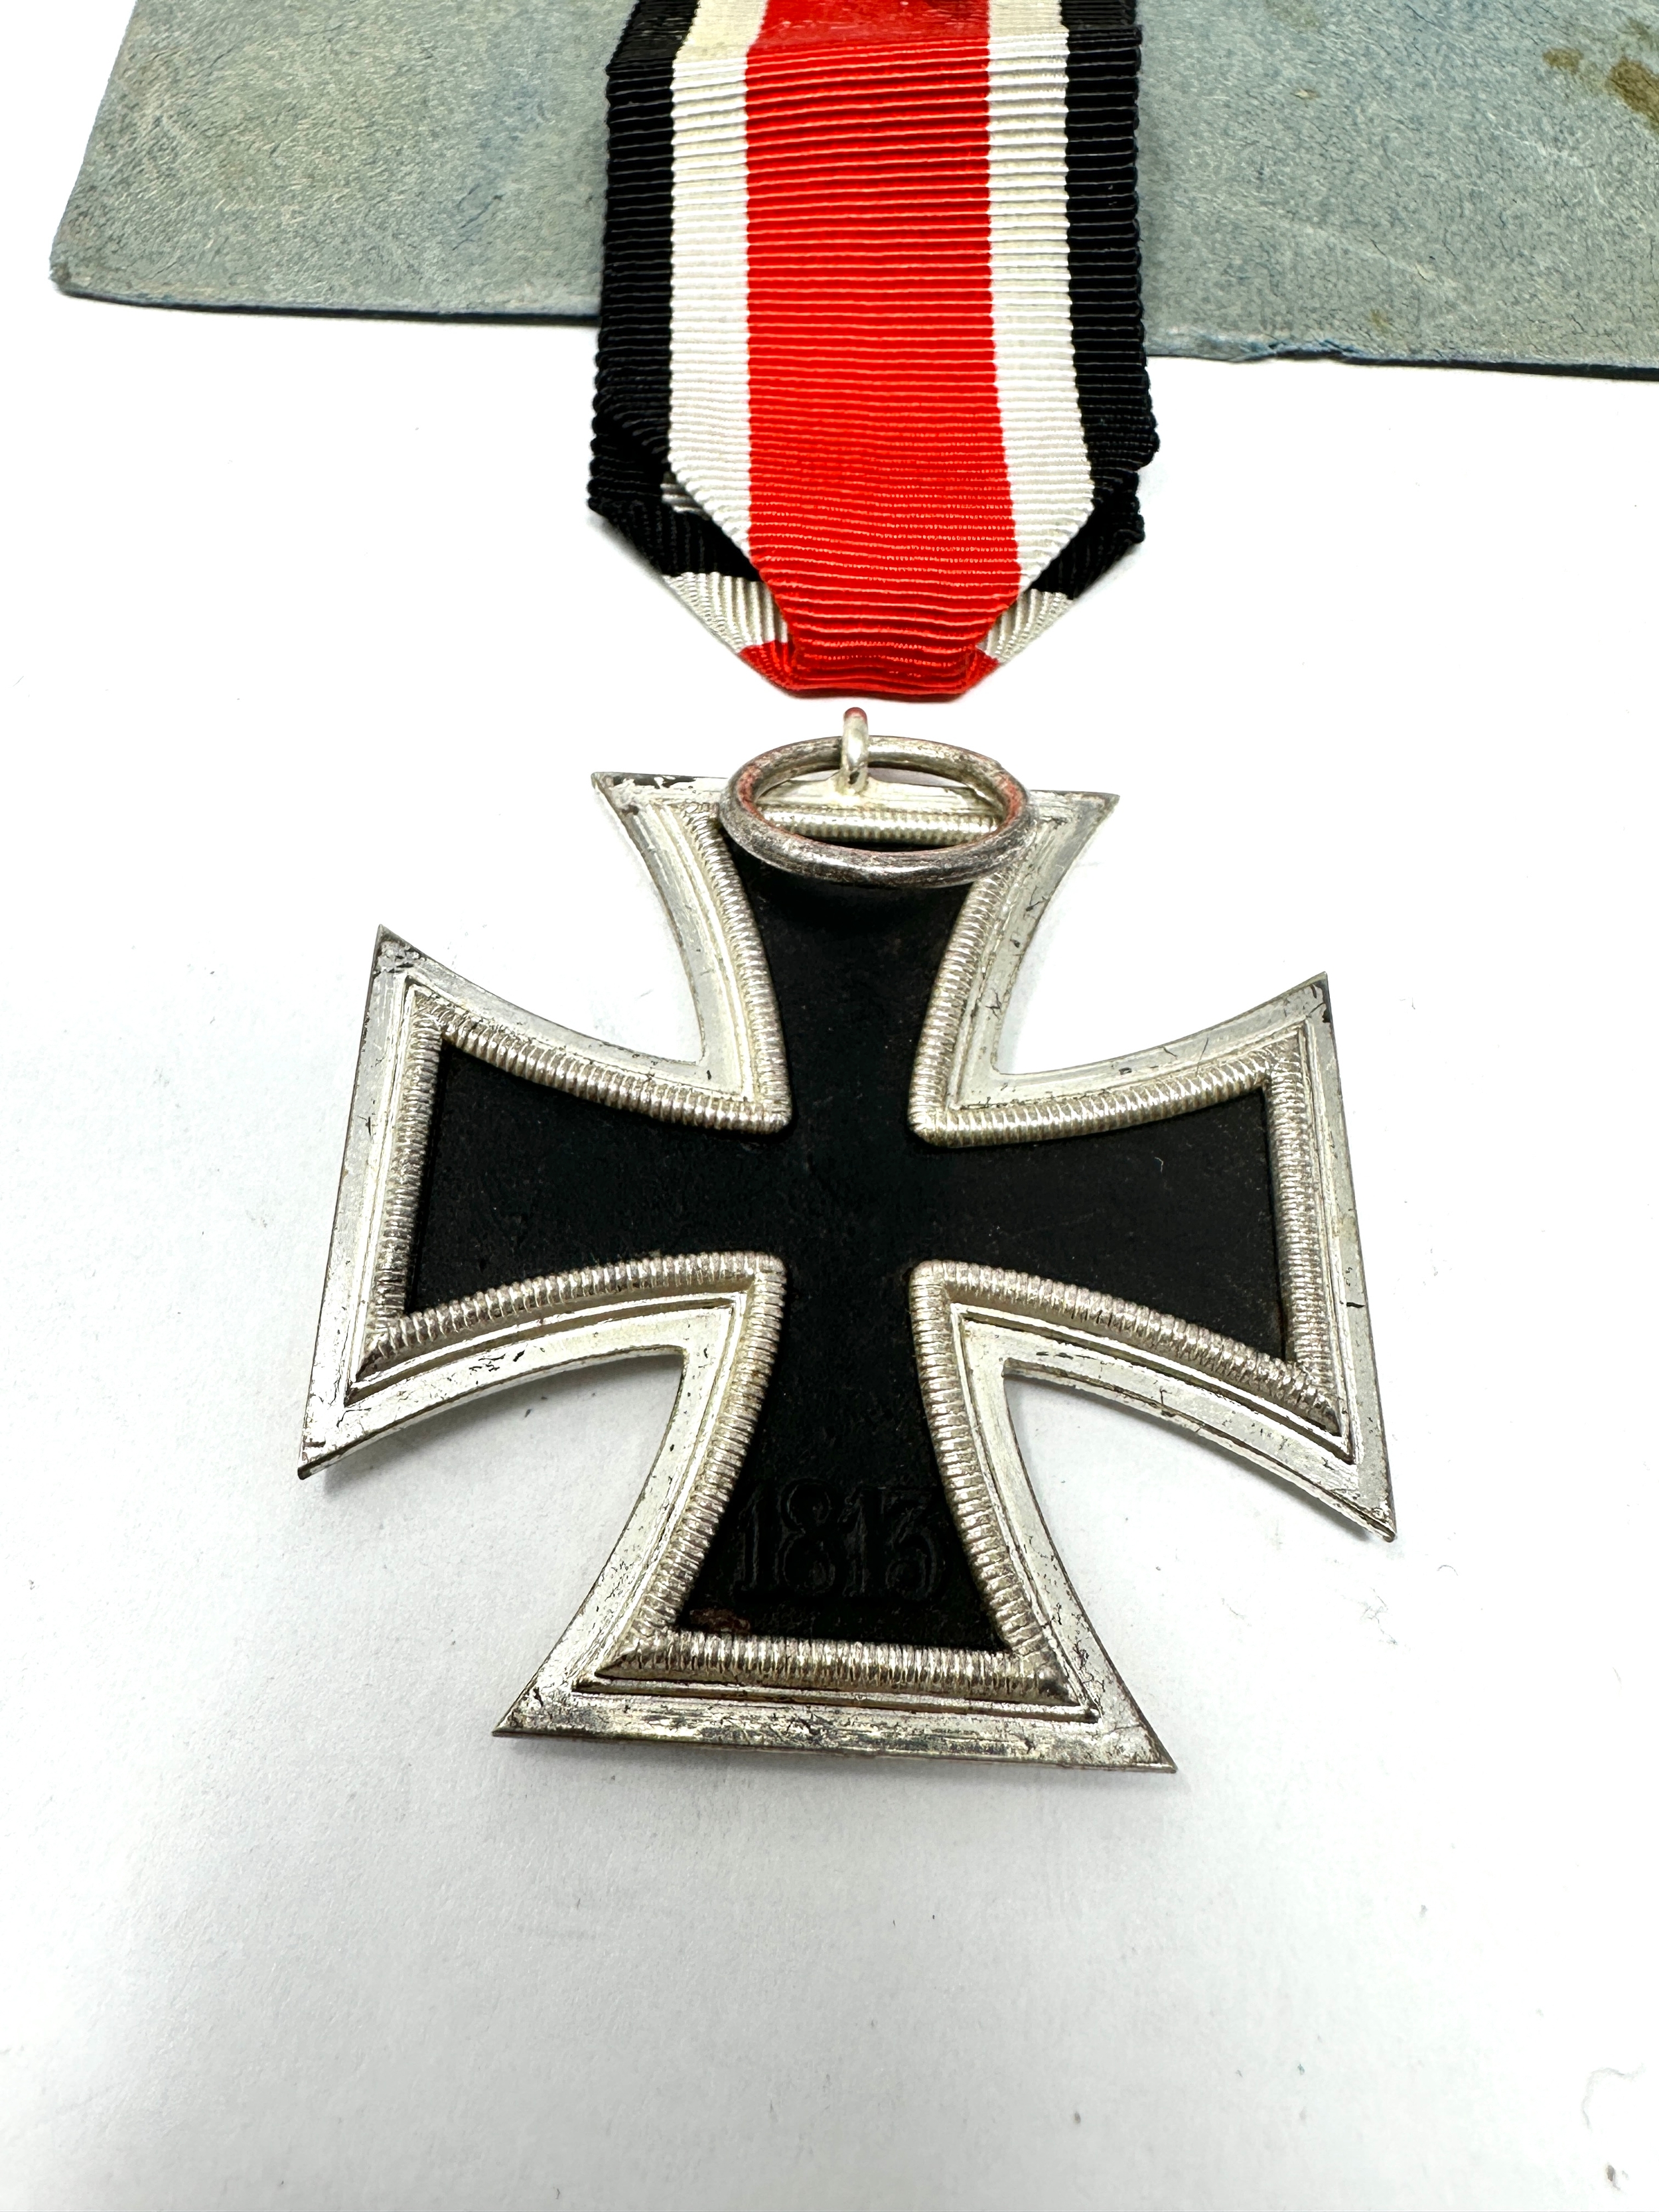 ww2 german iron cross 2nd class & paper packet ring stamp No 3 - Image 2 of 2